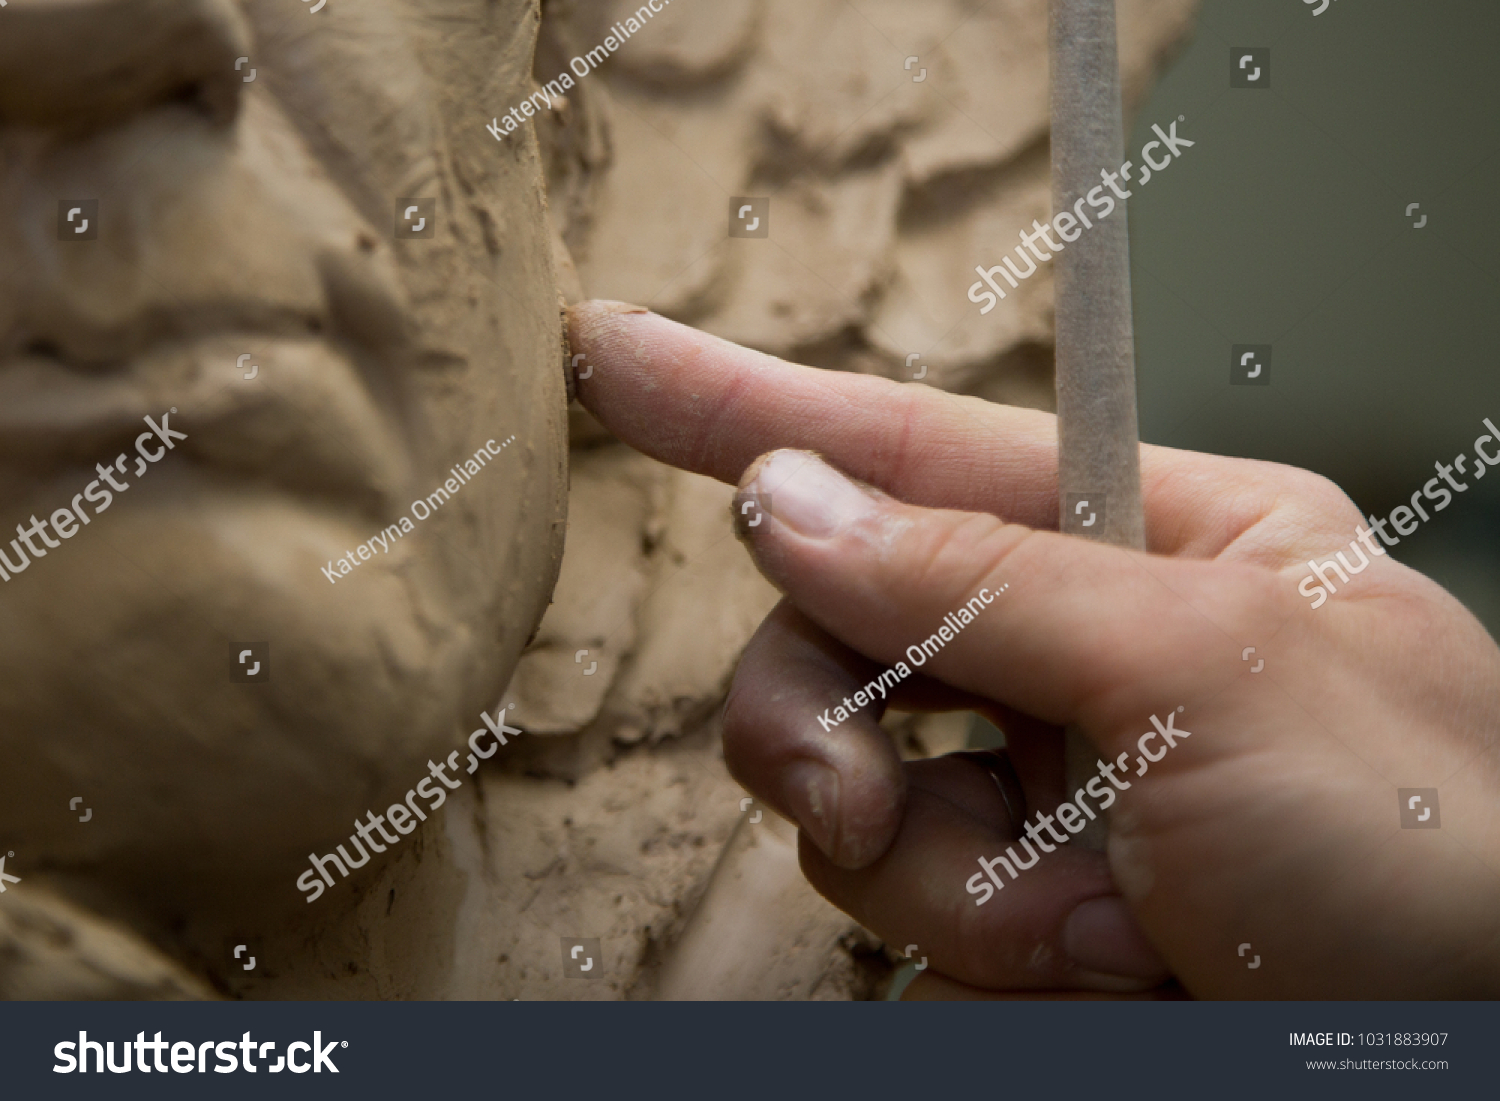 Sculptor artist creating a bust sculpture with clay #1031883907